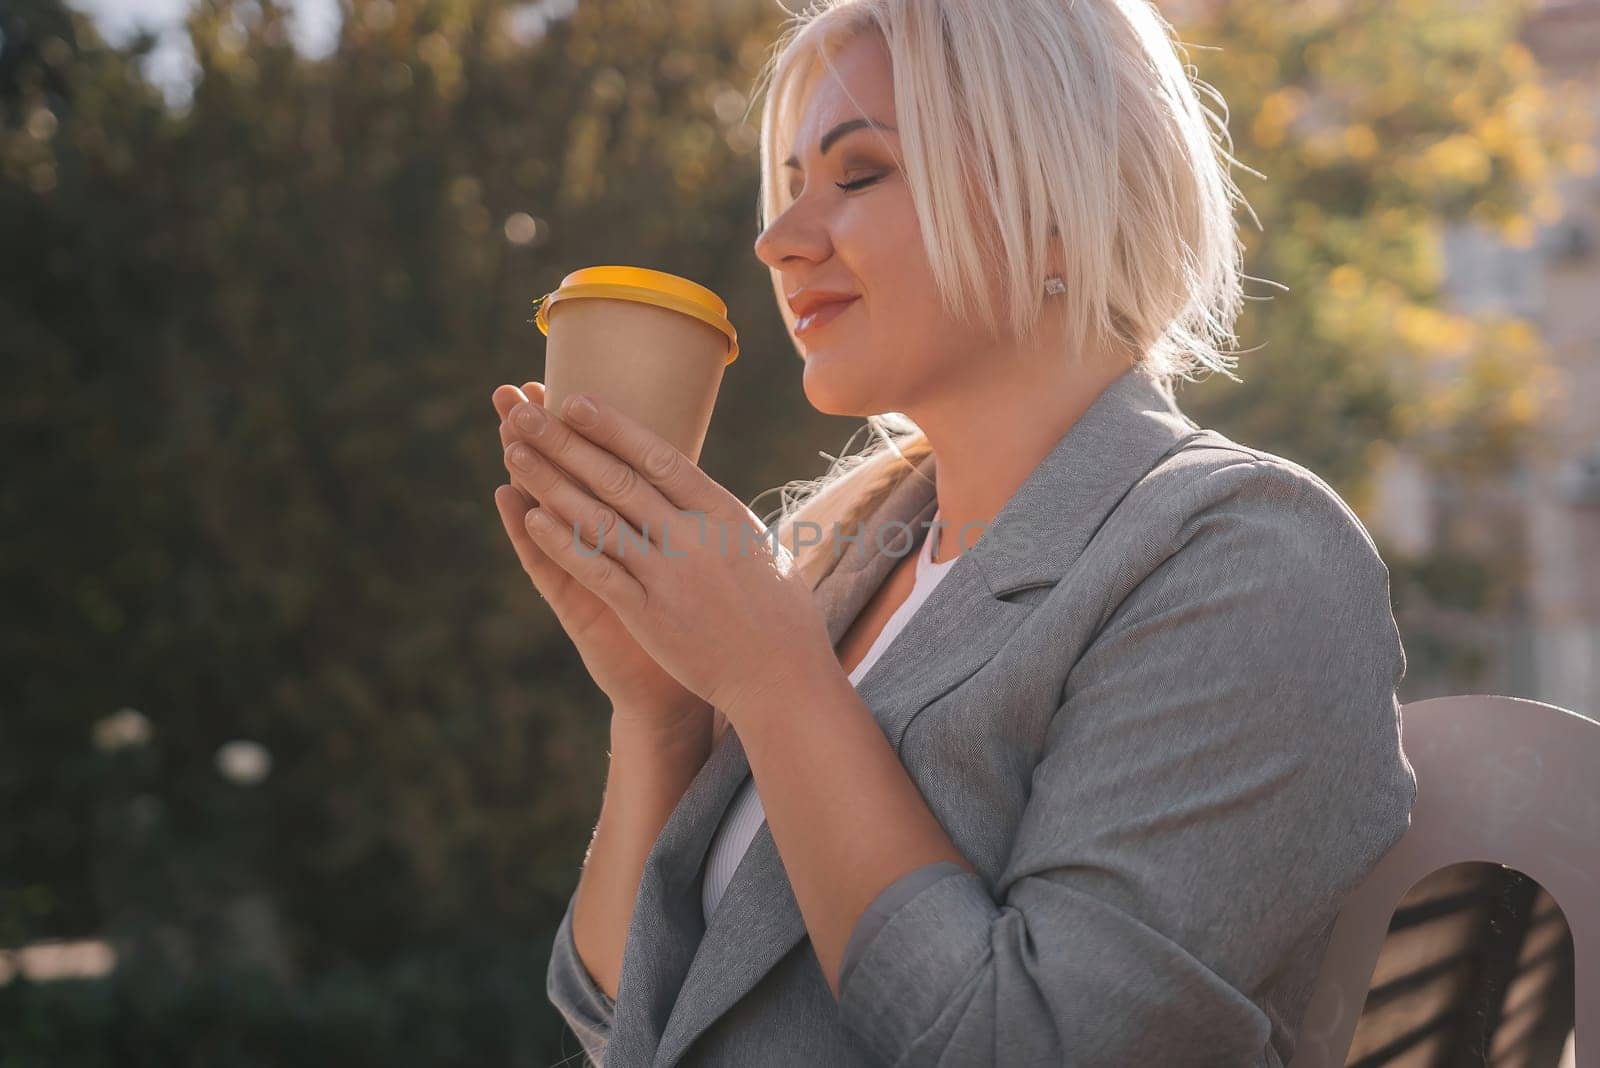 A blonde woman sits on a bench drinking coffee from a yellow cup. She is wearing a gray jacket and has her hair in a ponytail. The scene is peaceful and relaxing. by Matiunina